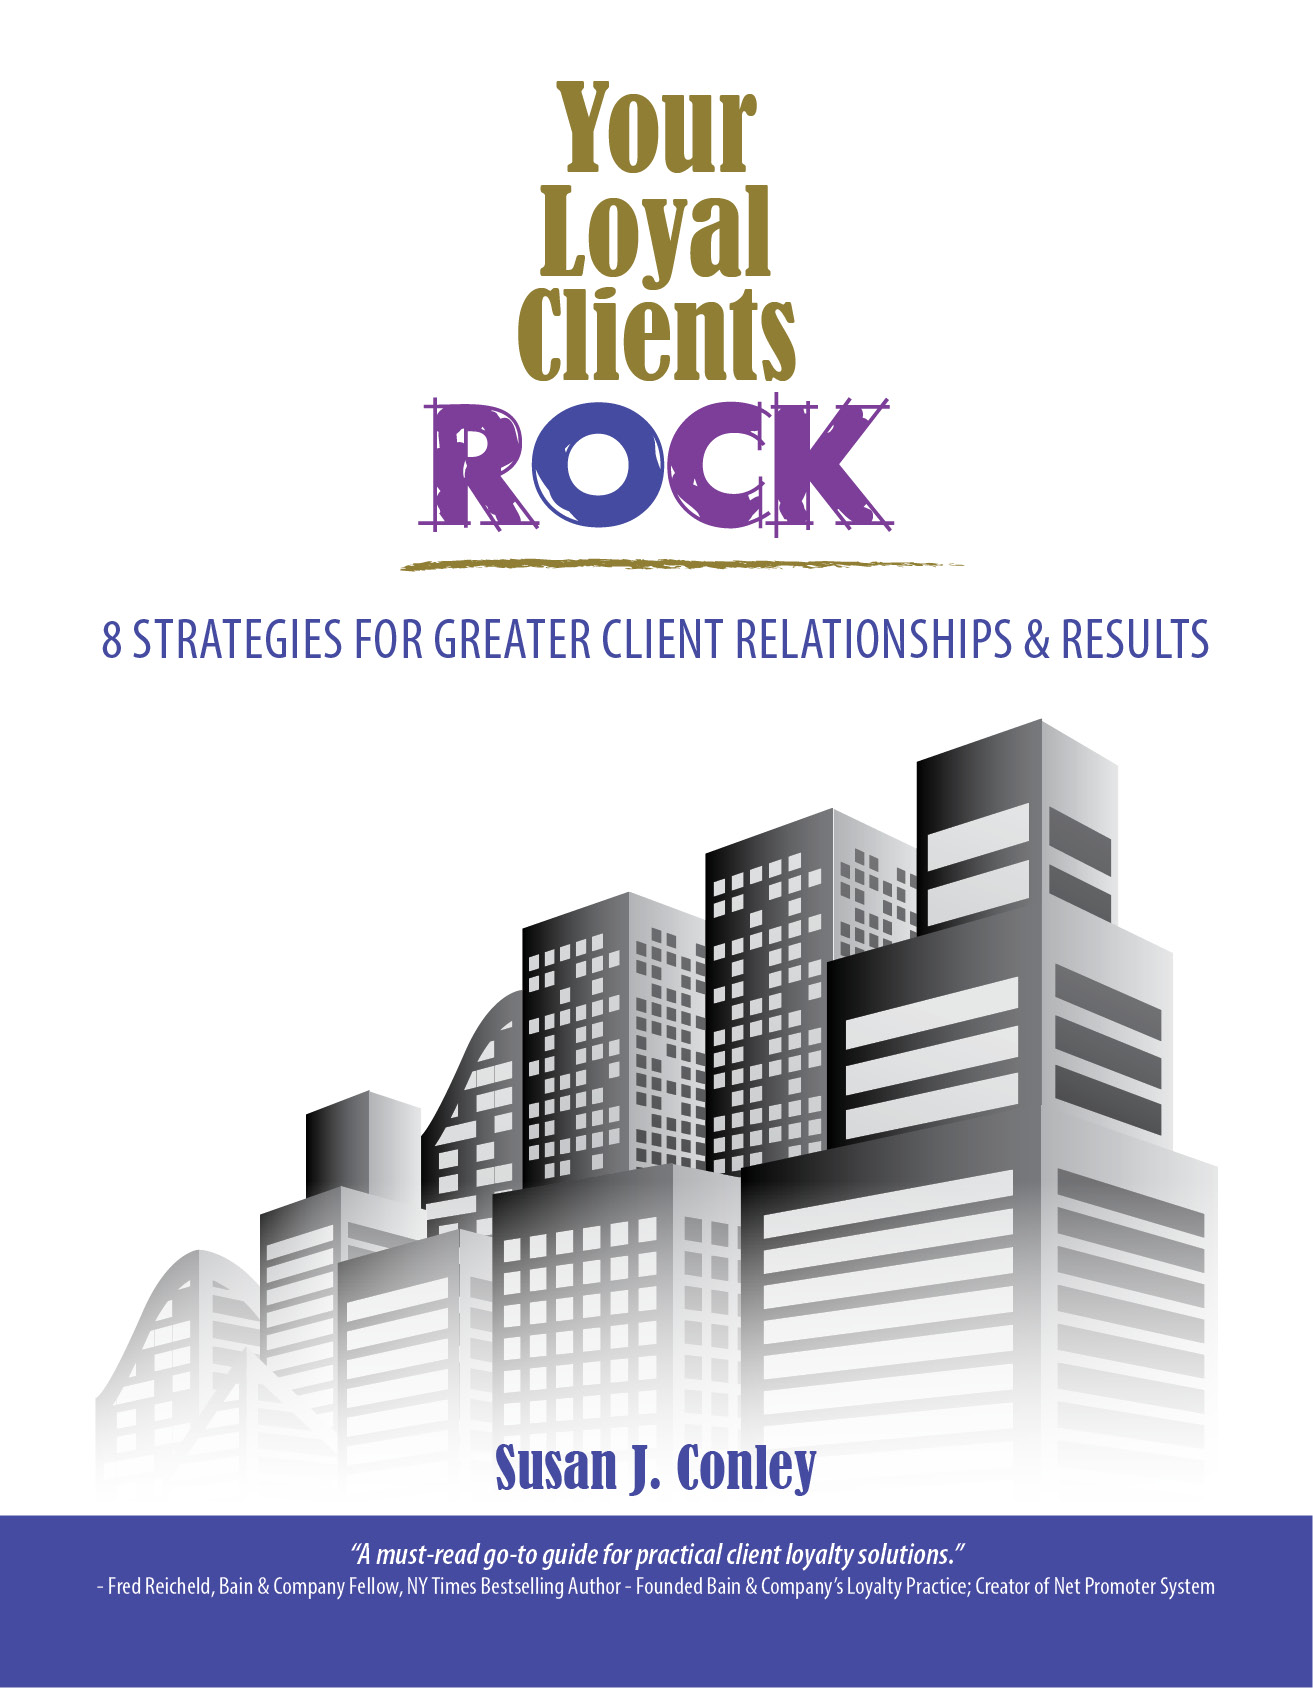 Your Loyal Clients ROCK - 8 Strategies for Greater Client Relationships and Results - Susan Conley, ROCKbiz, Inc.